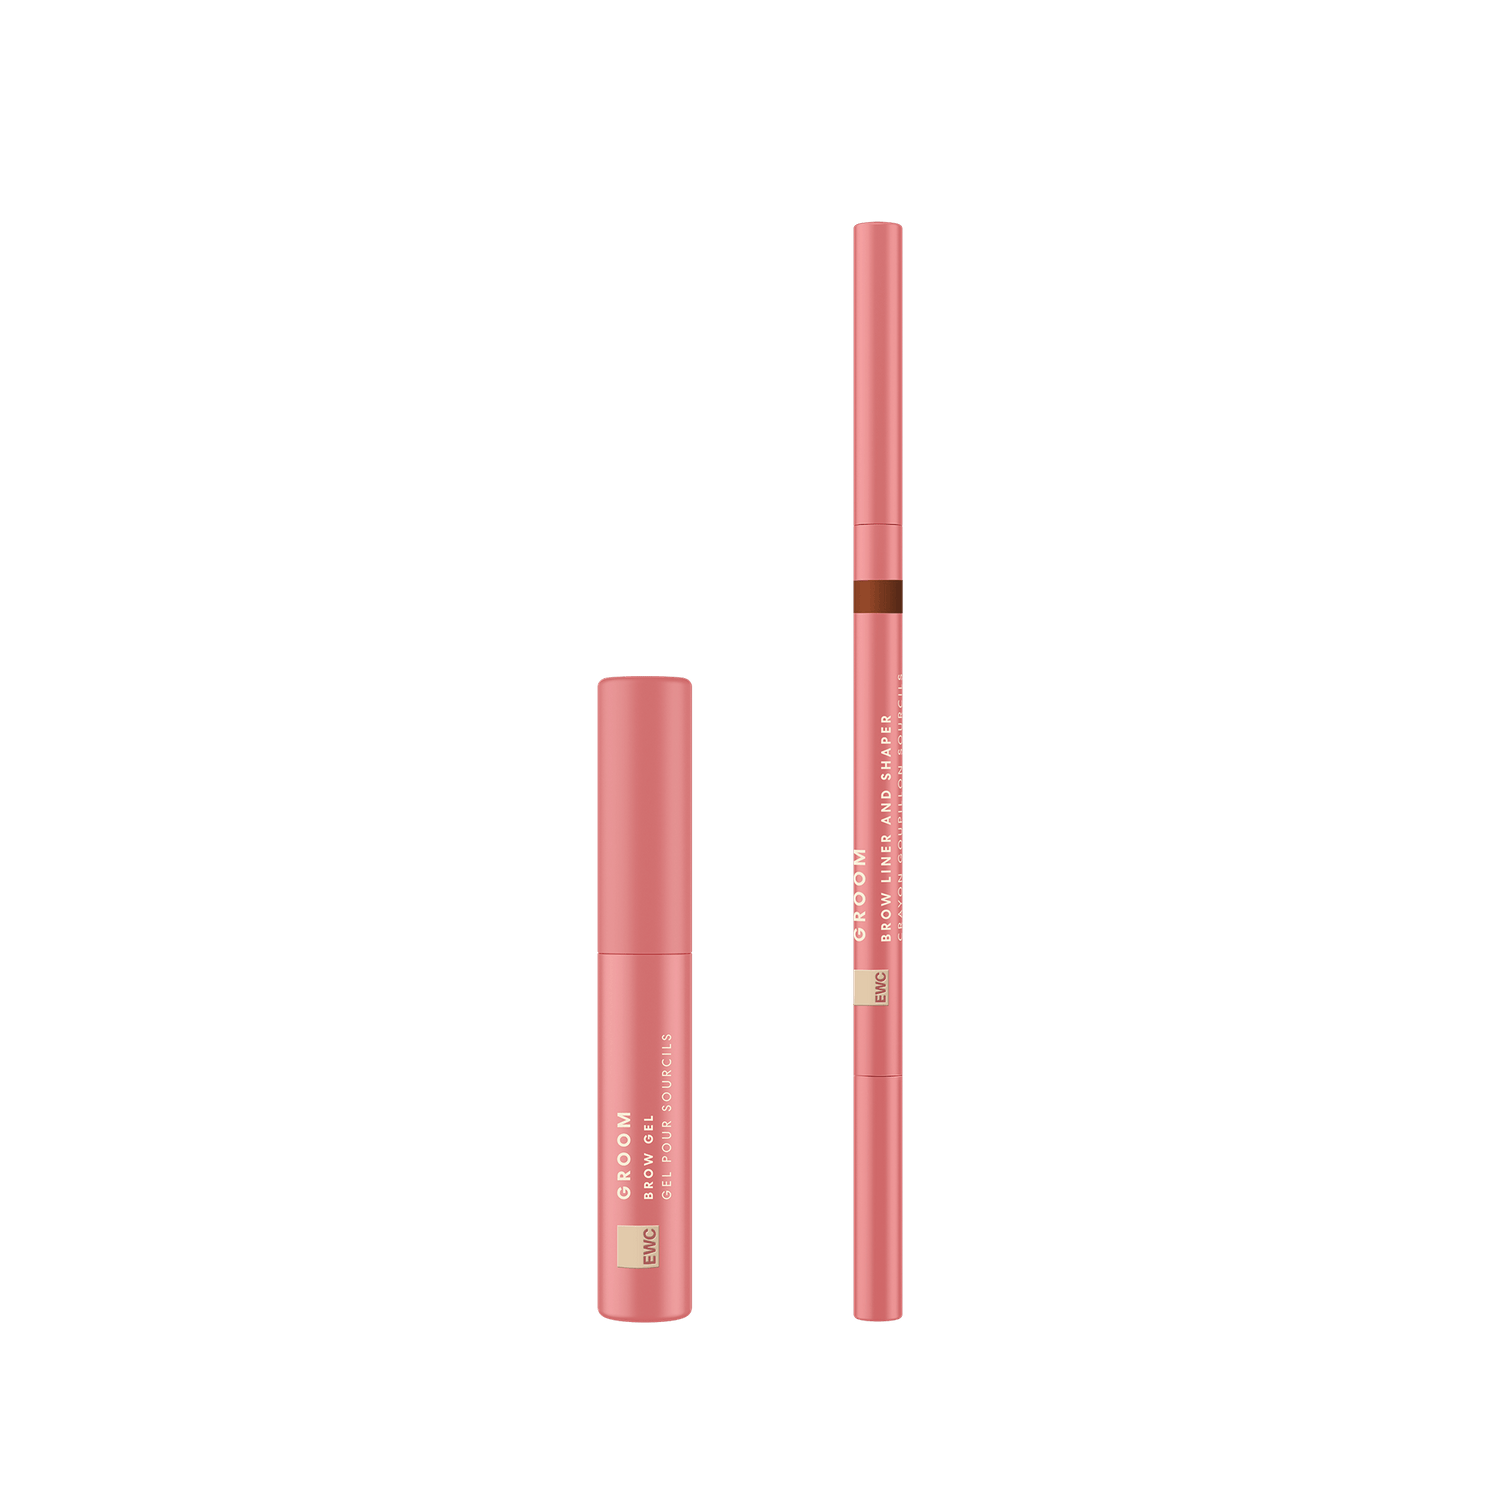 European Wax Center Define and Tame Brow Kit including pink Groom Brow Gel tube and pink Groom Brow Liner and Shaper pencil on transparent background